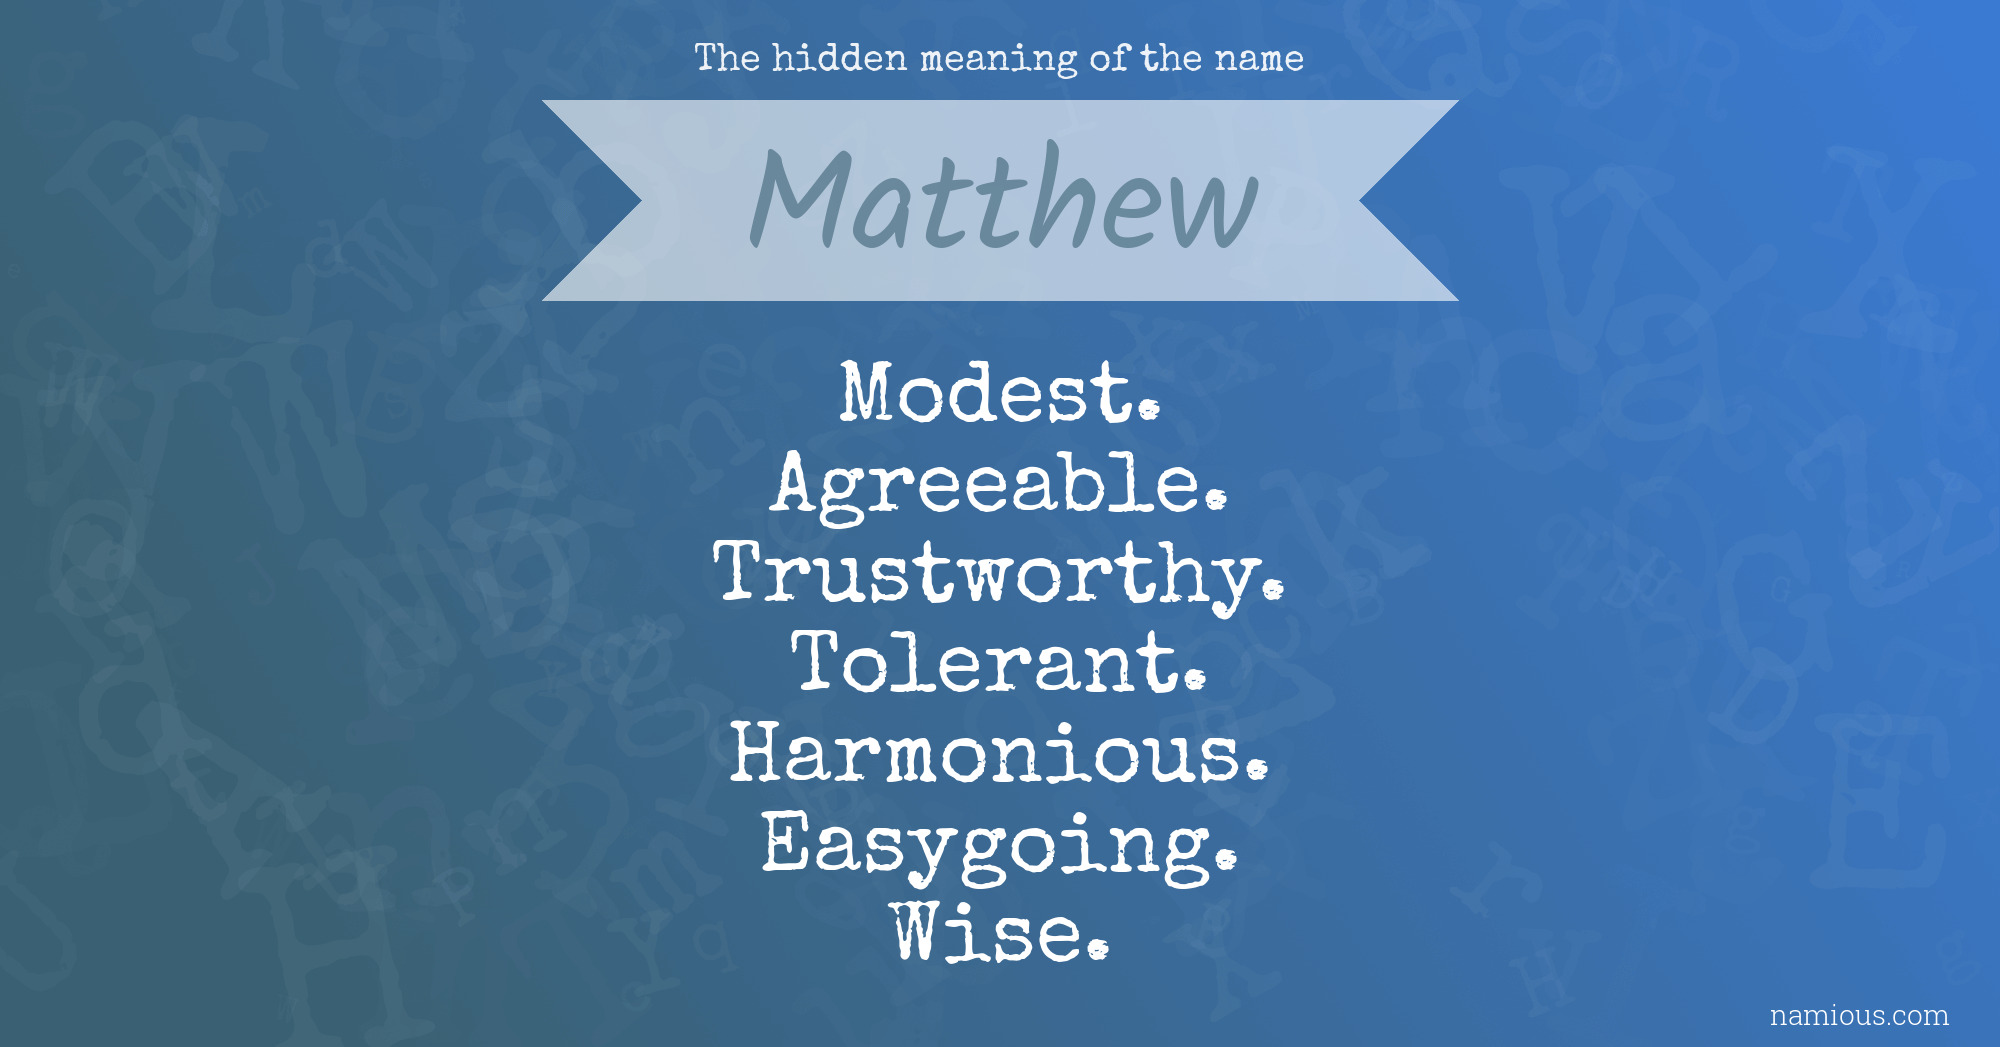 The hidden meaning of the name Matthew